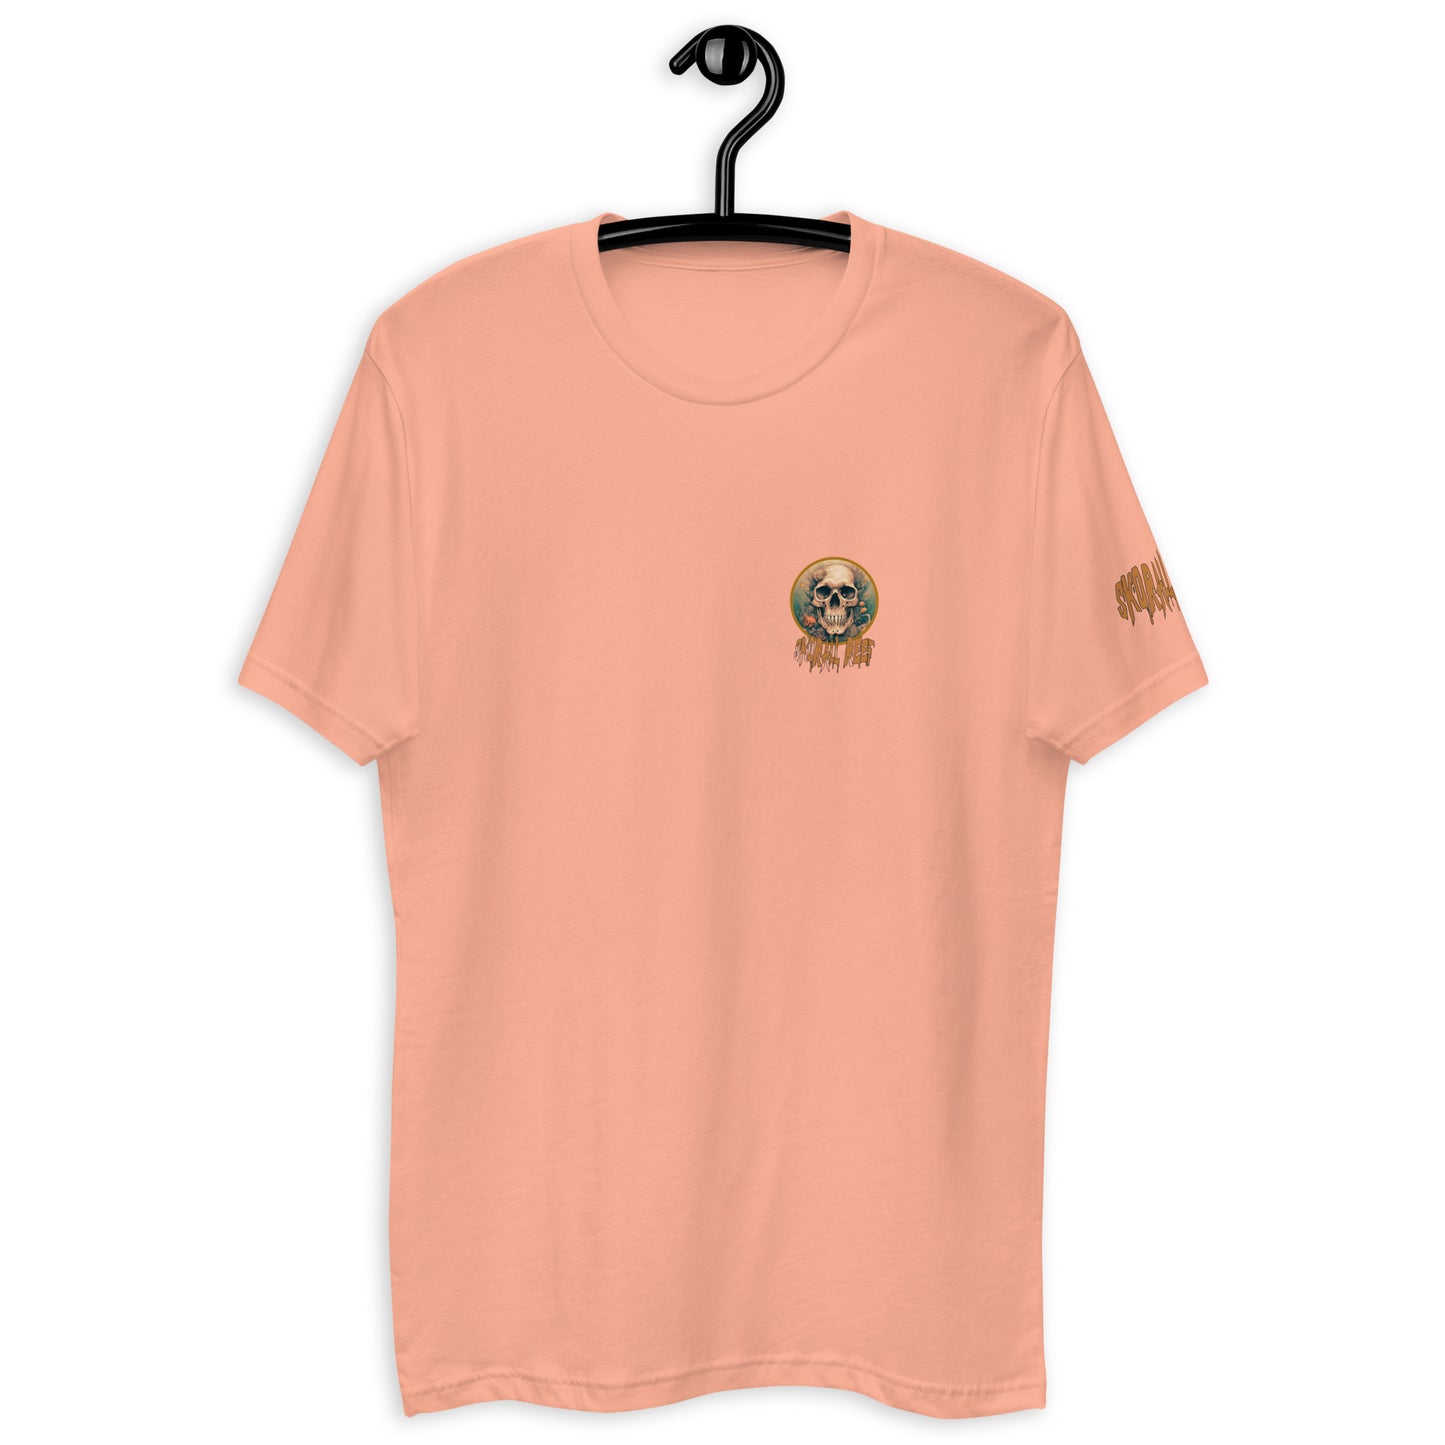 Men's-fitted Skorall Reef T-shirt